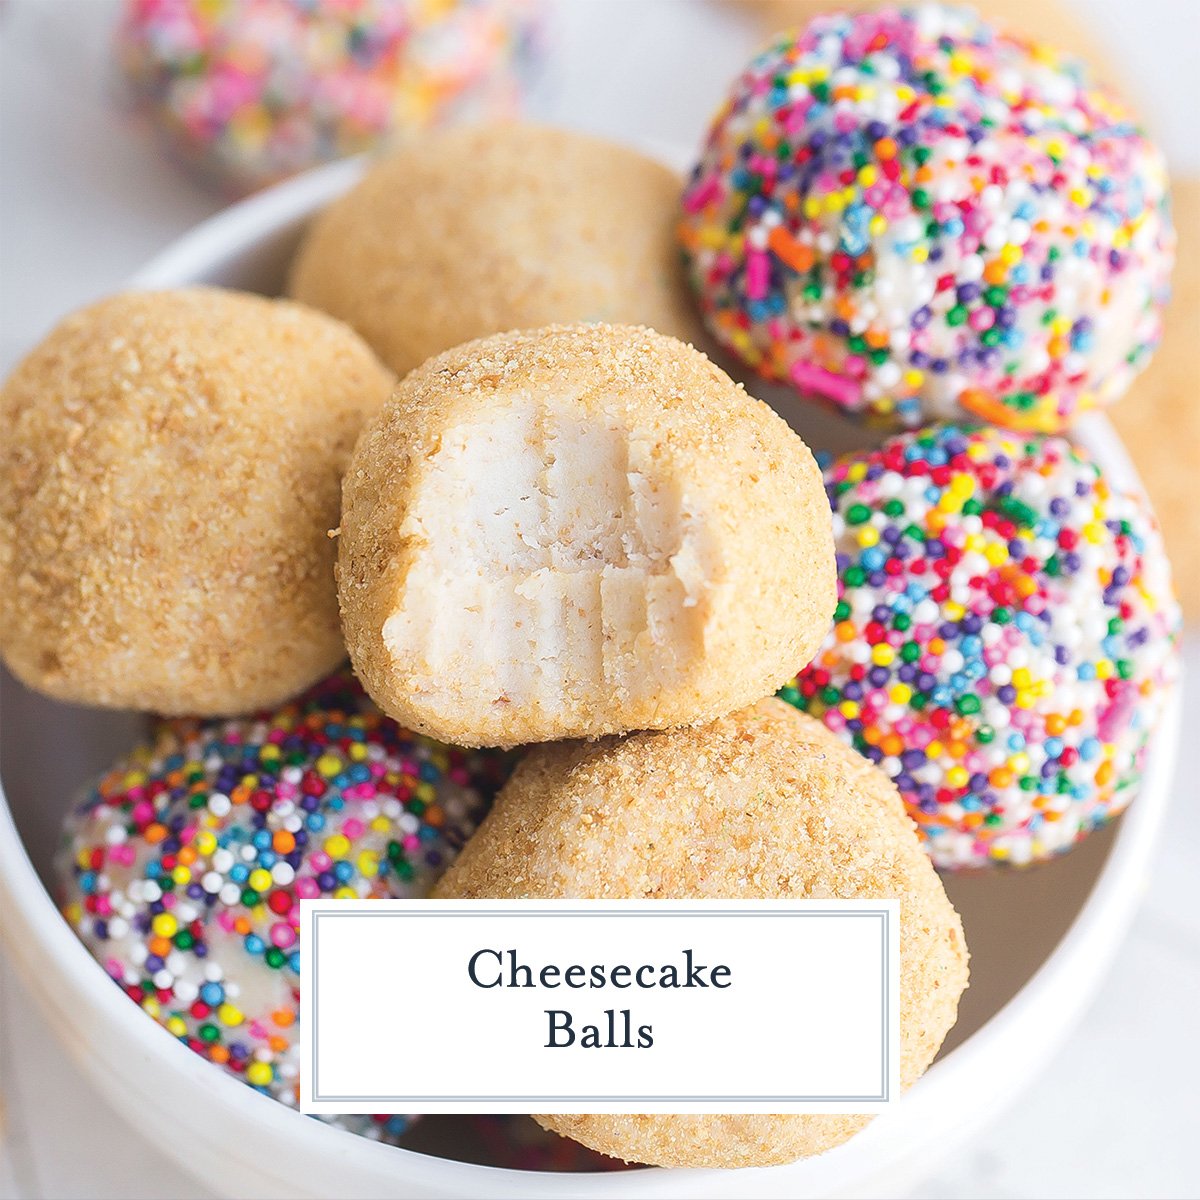 cheesecake ball image with text overlay